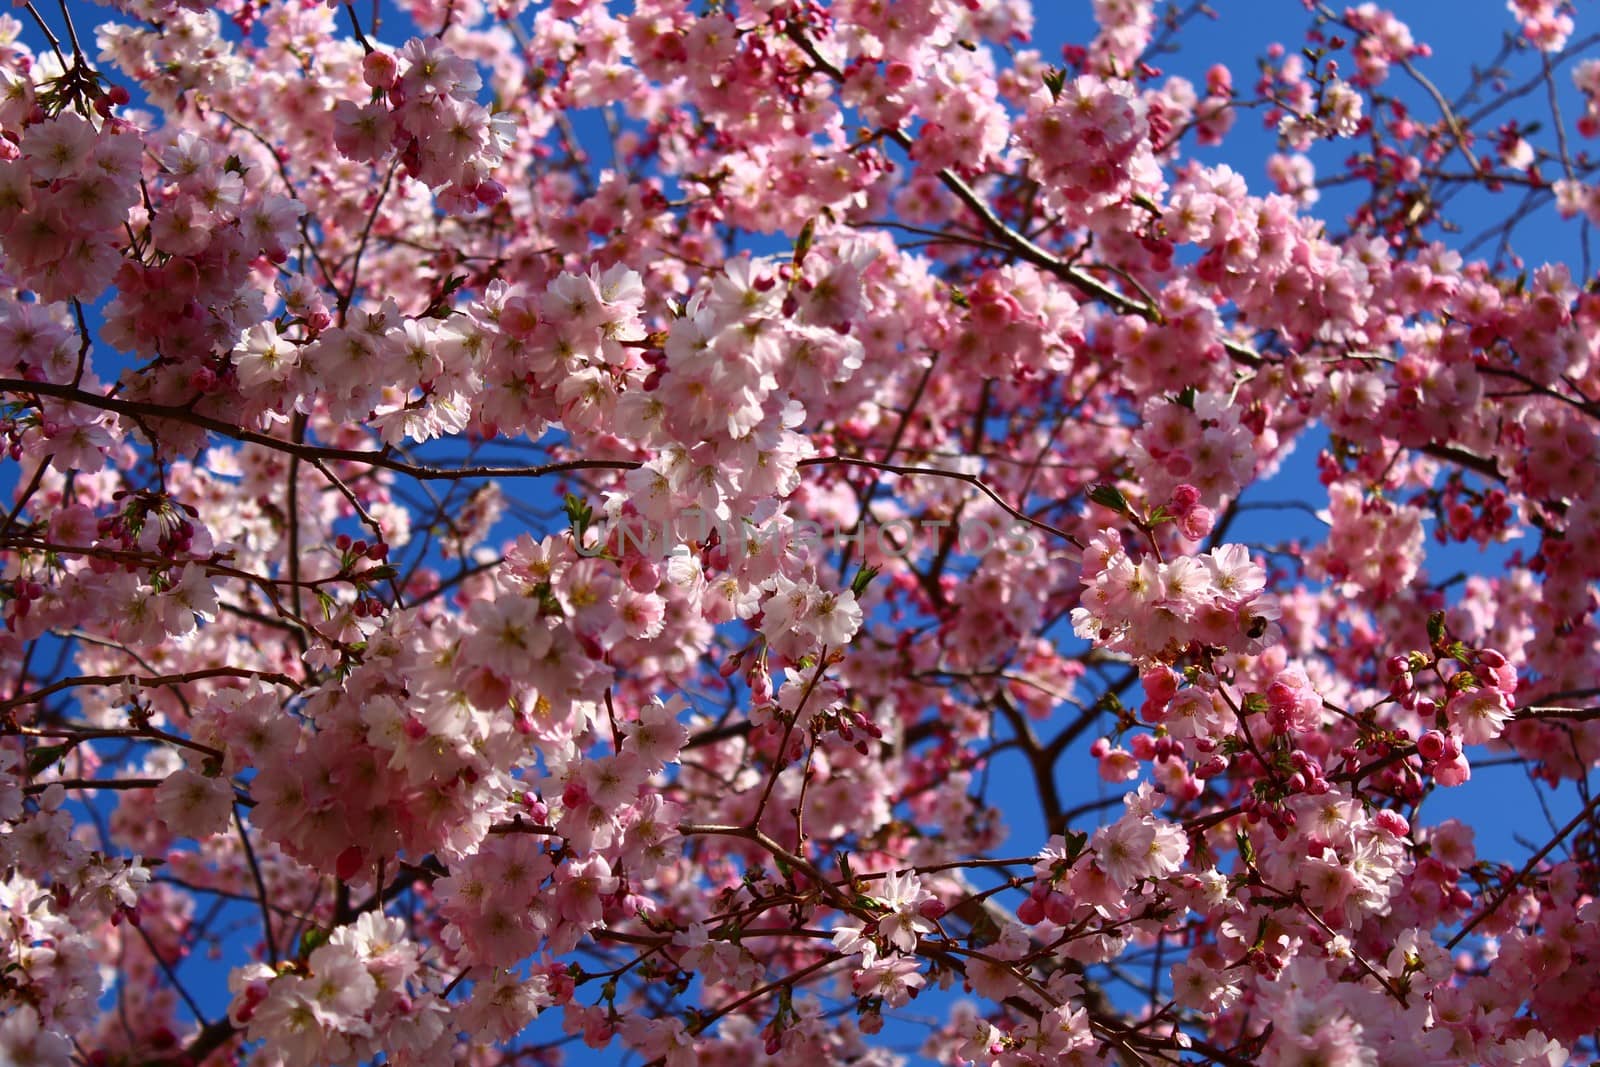 The picture shows pink blossoms in the spring in front of the blue sky